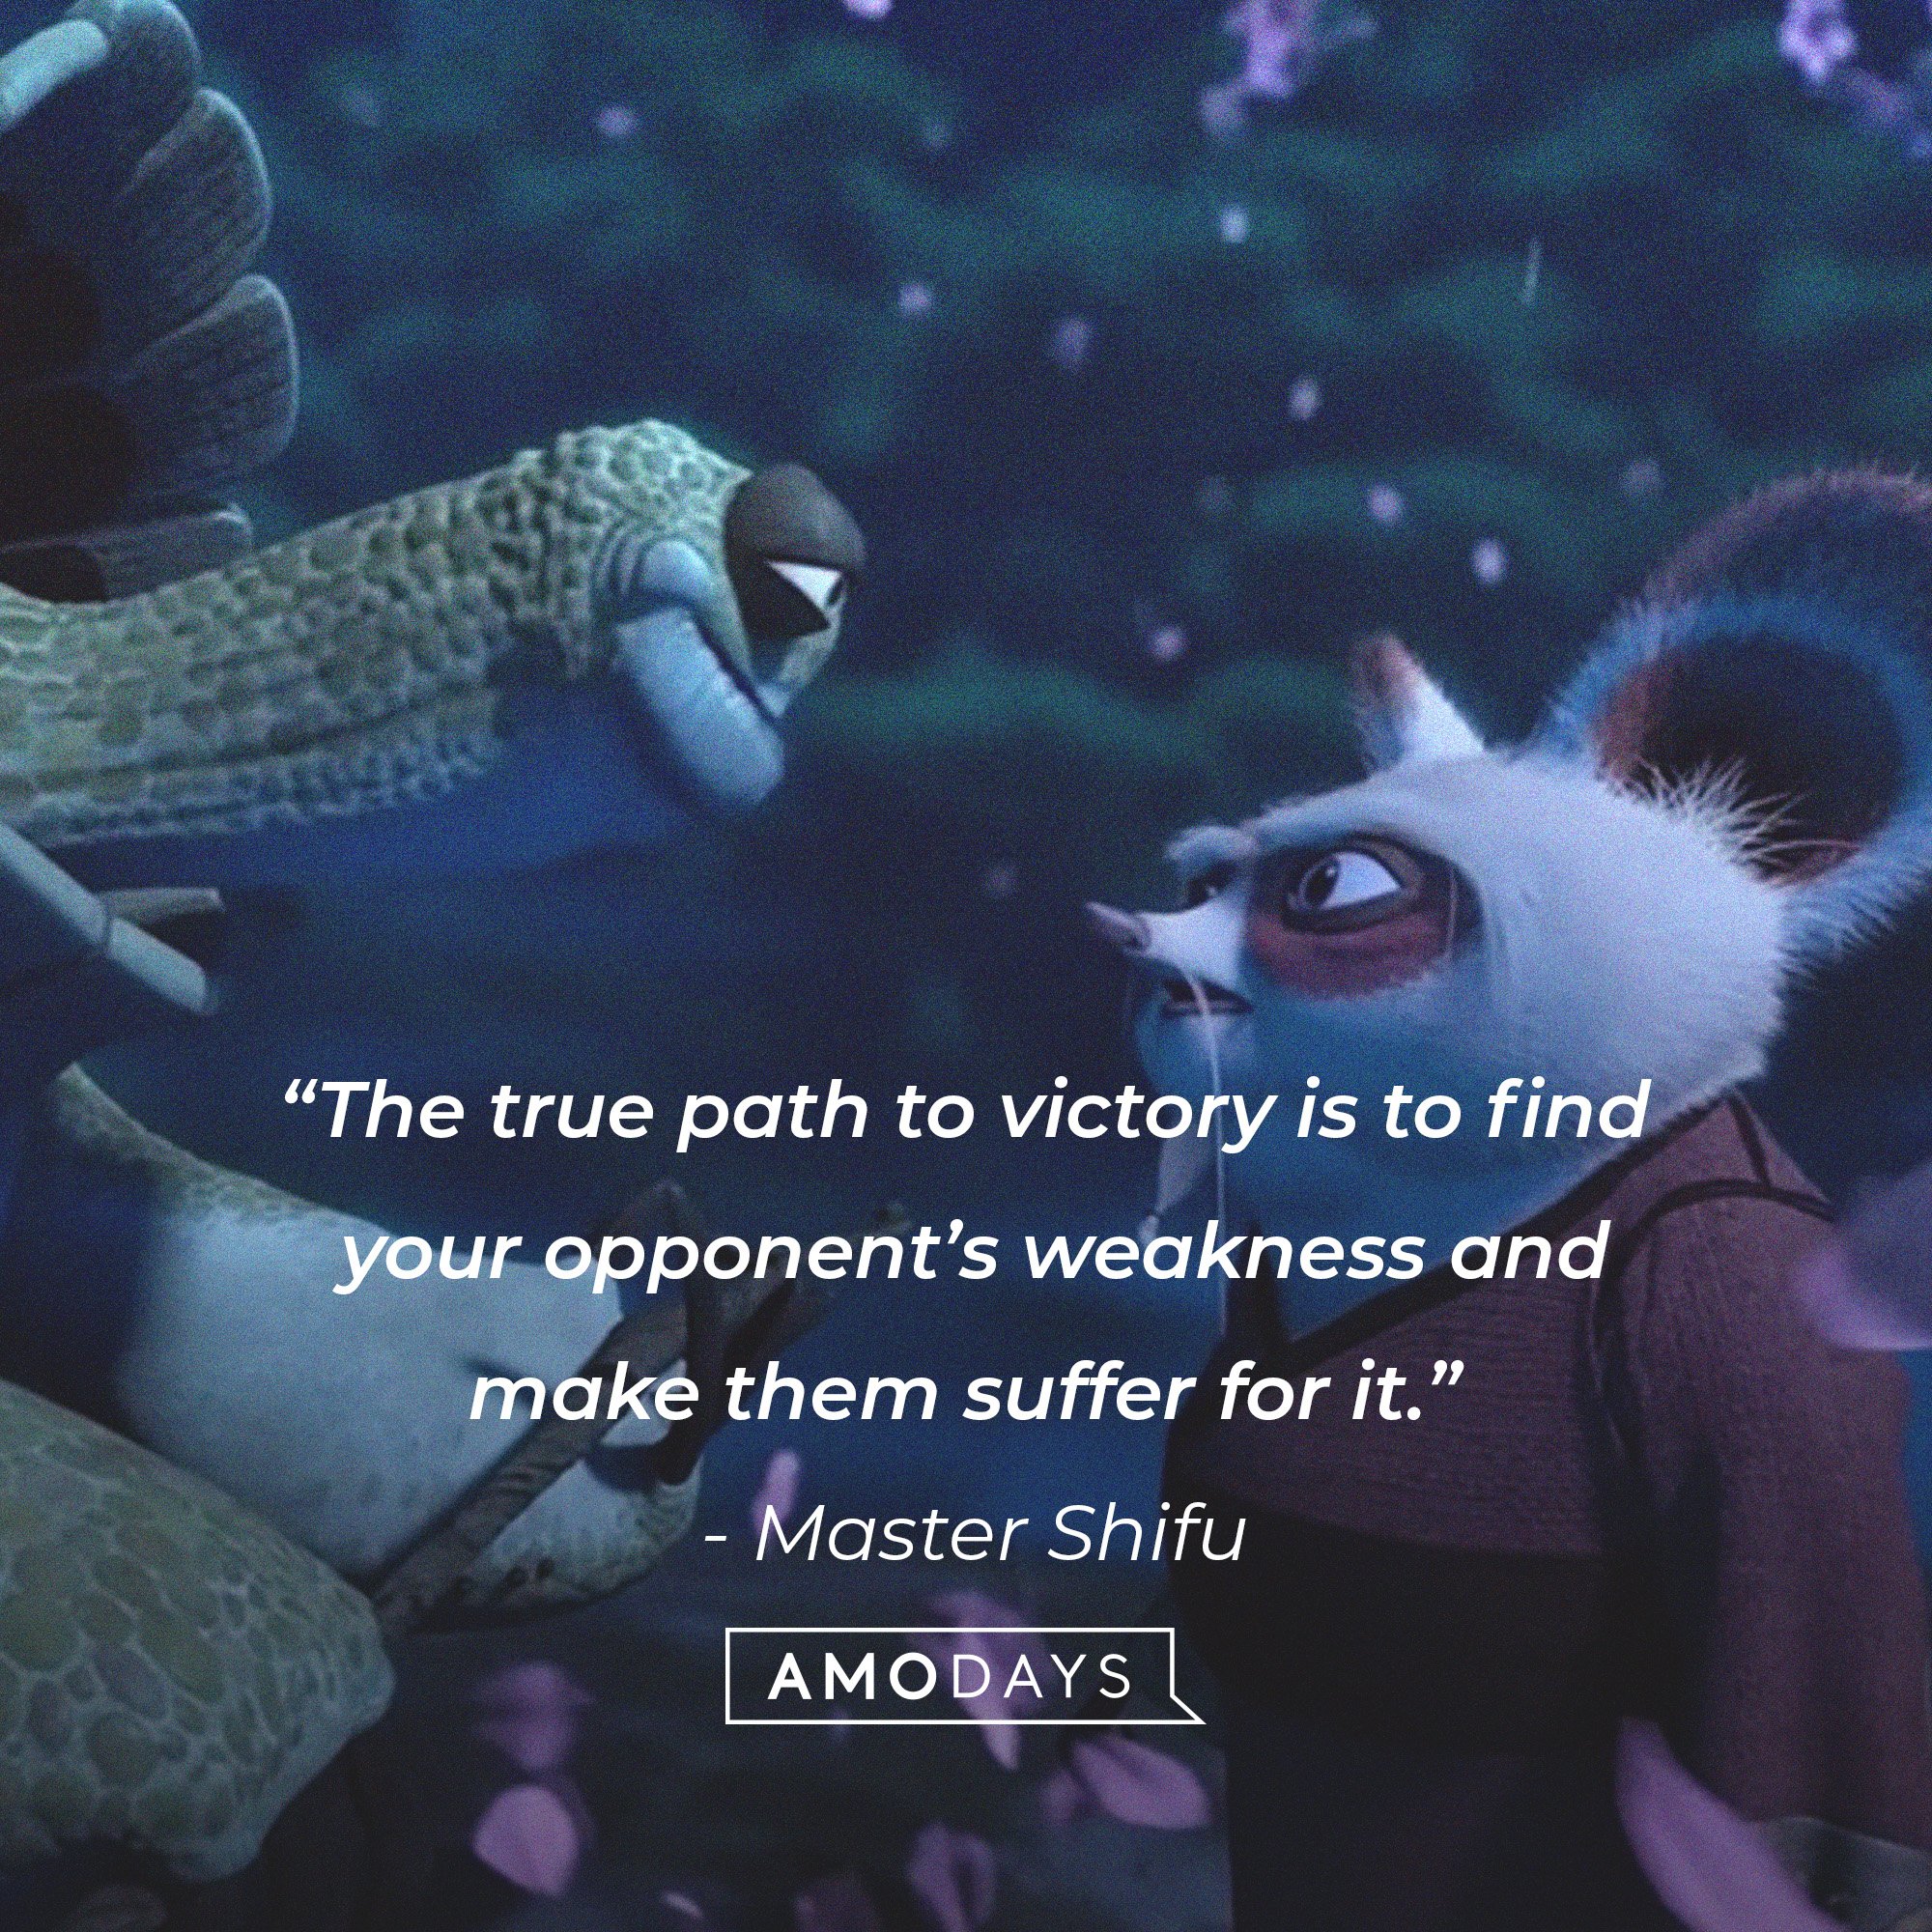  Master Shifu’s quote:“The true path to victory is to find your opponent’s weakness and make them suffer for it.” | Image: AmoDays